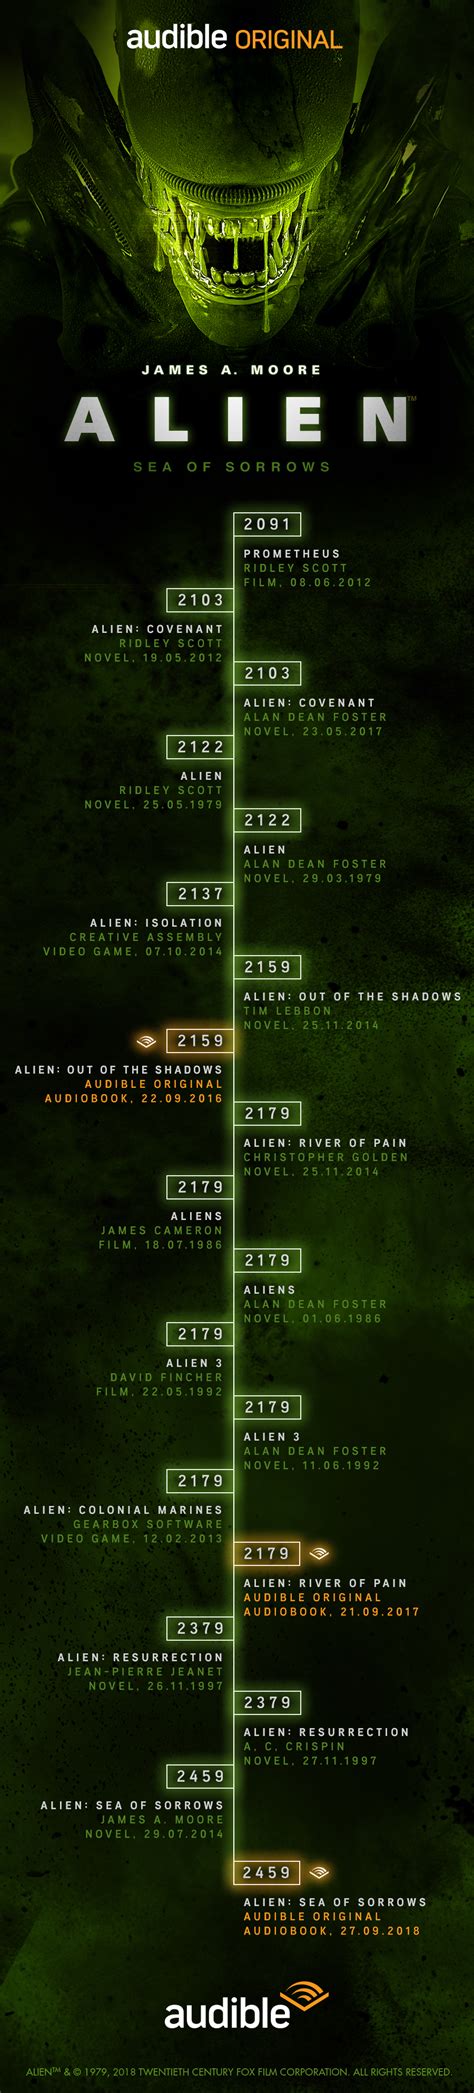 alien movies in chronological order